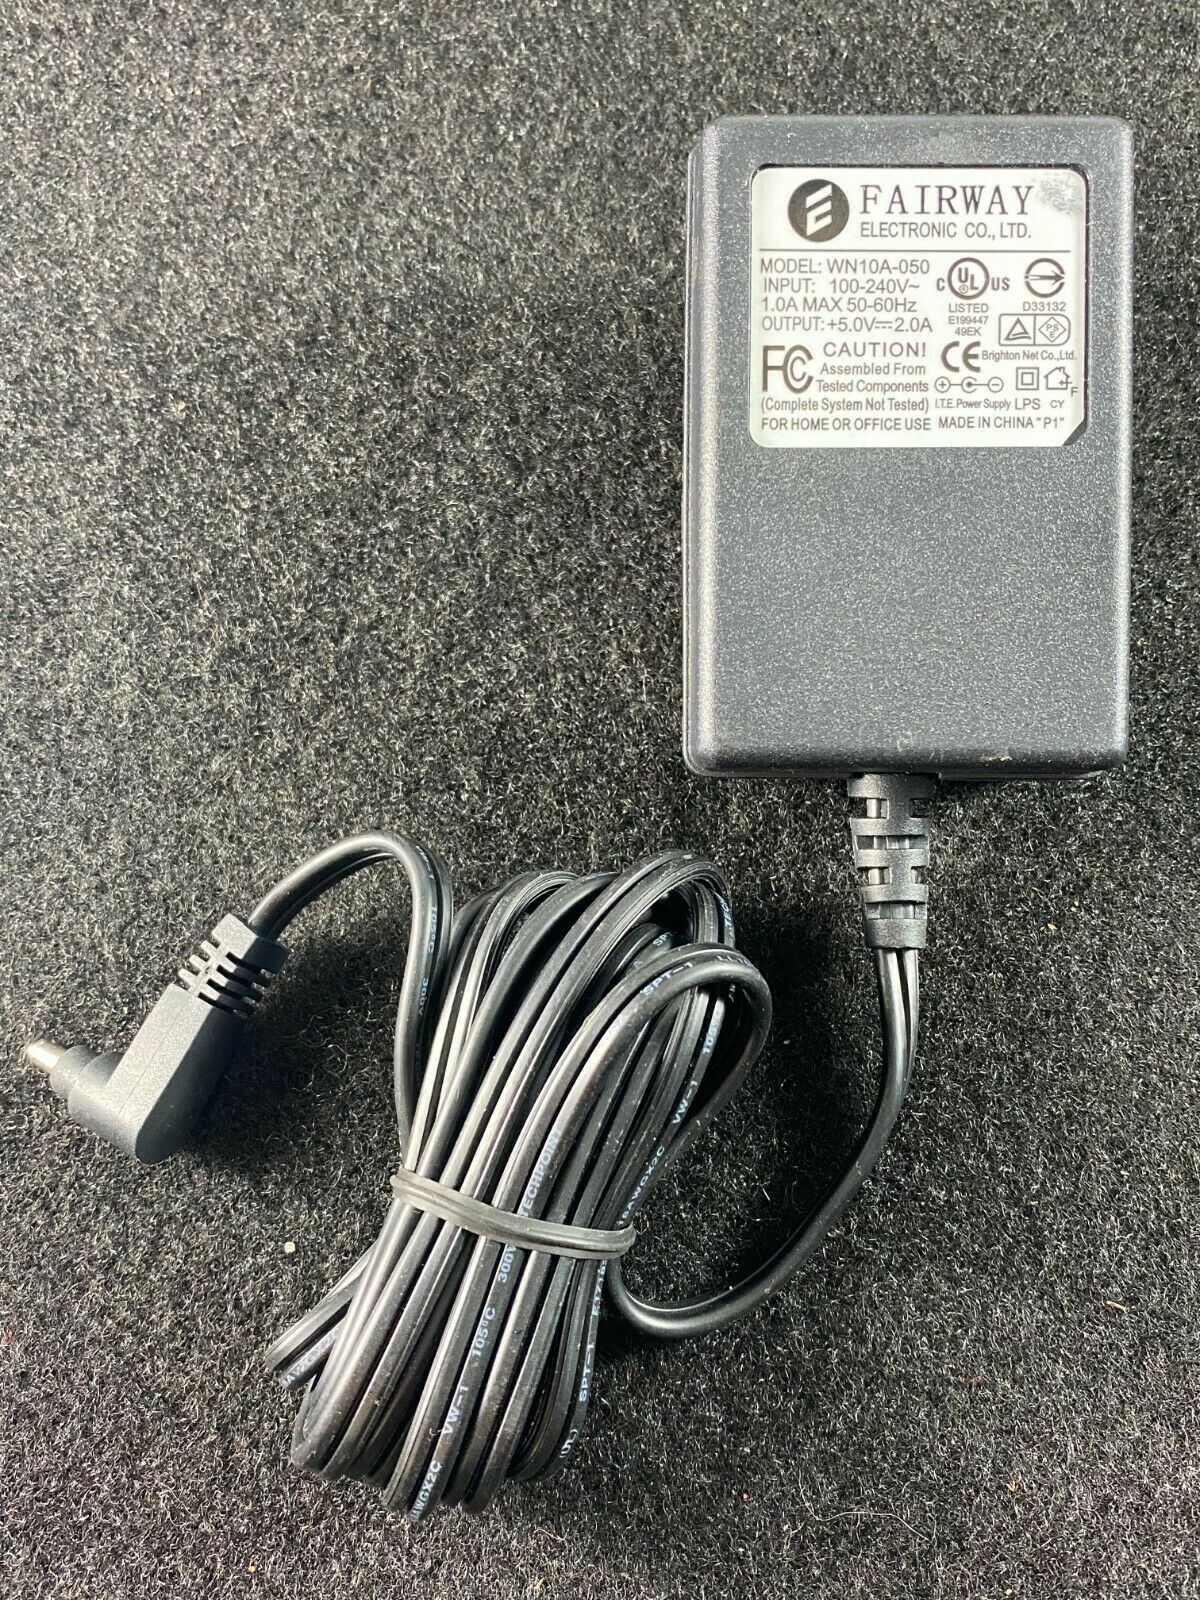 DC Power Supply: 100-240VAC 5V 2A 1.3mm x 3.5mm Tip Negative WN10A-050 Adapter Features: Flat Cable Connector B: Unk